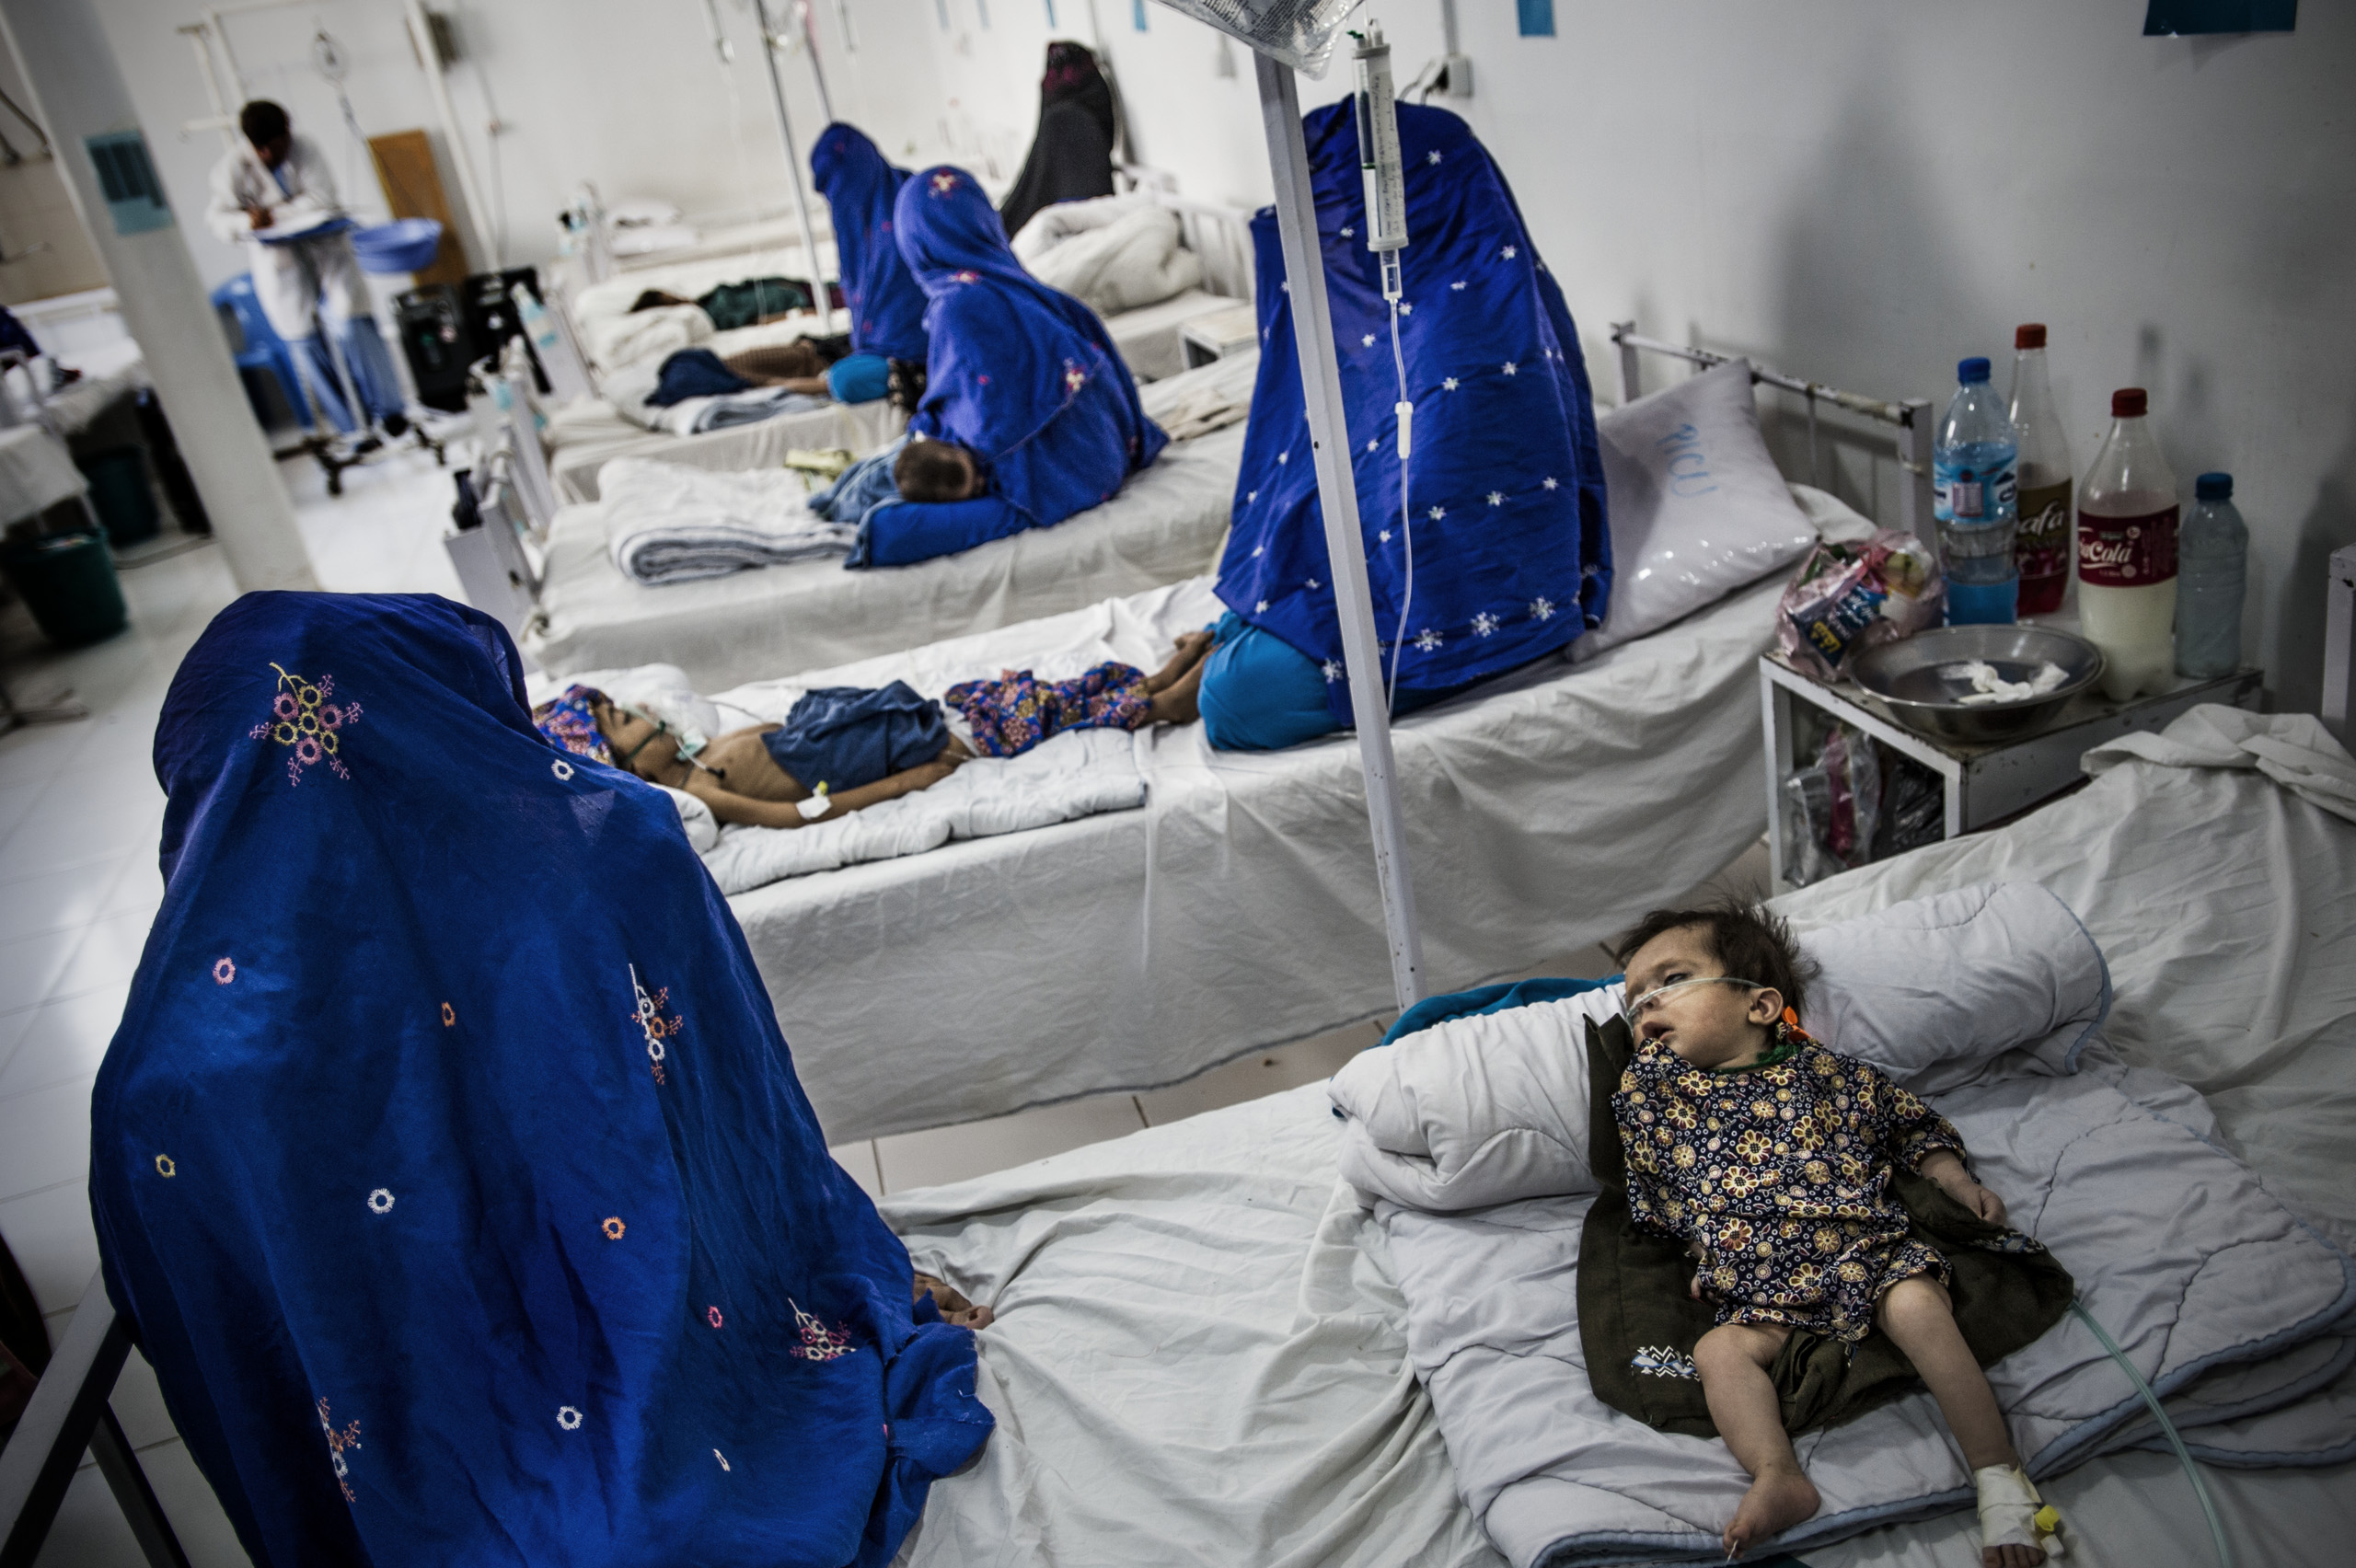 The pediatric intensive care unit in Boost hospital which is run by Doctors Without Borders, Lashkar Gah, Helmand, Afghanistan, June 2016.